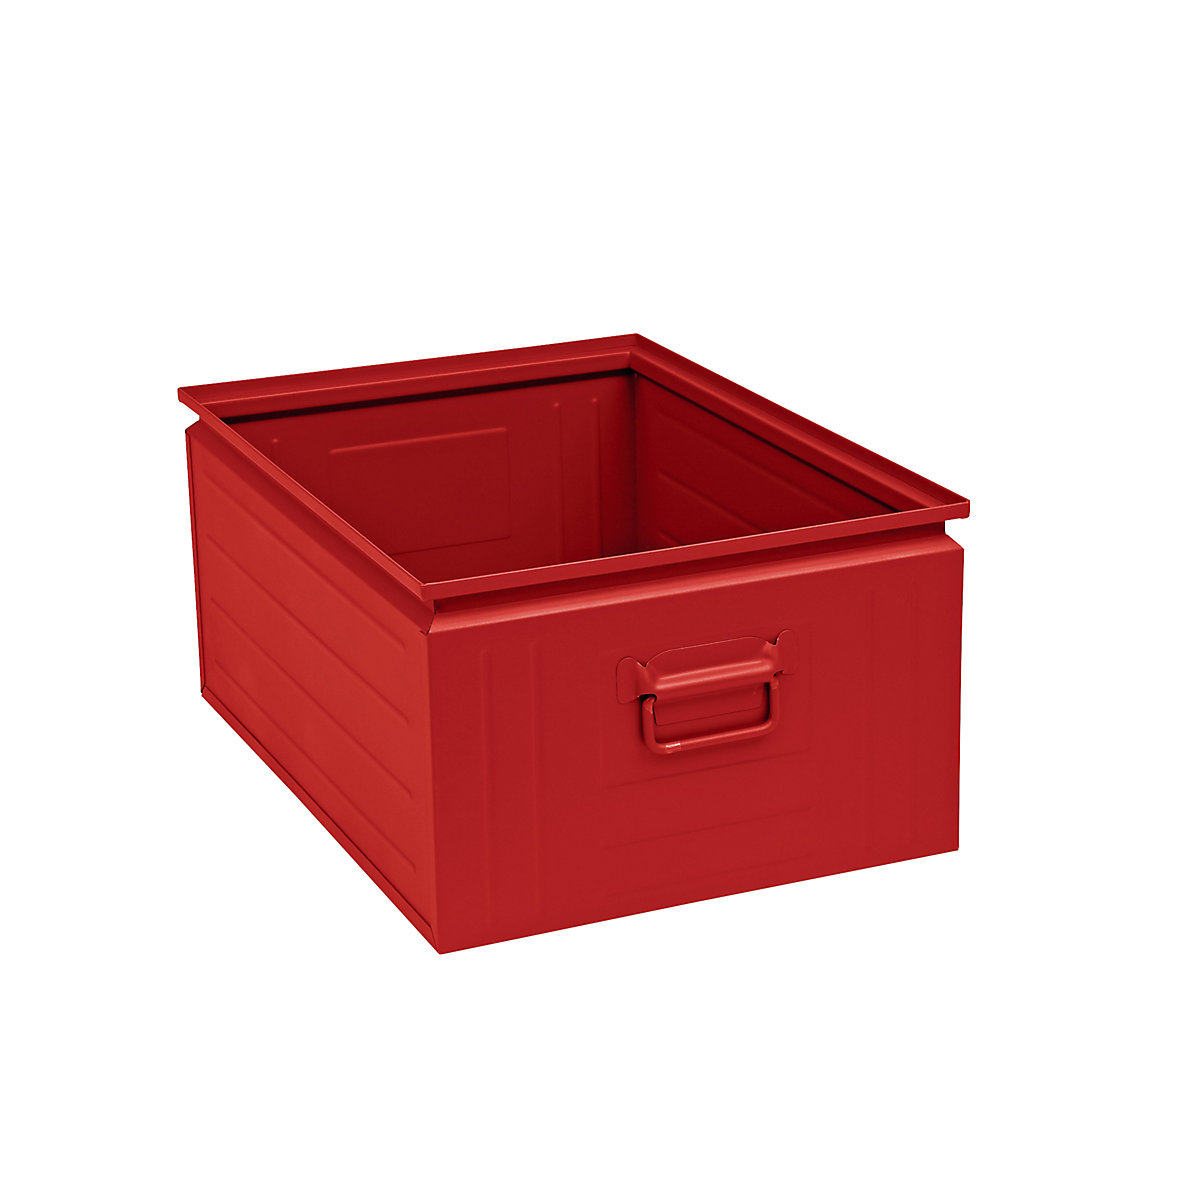 Stacking container made of sheet steel, capacity approx. 80 l, flame red RAL 3000